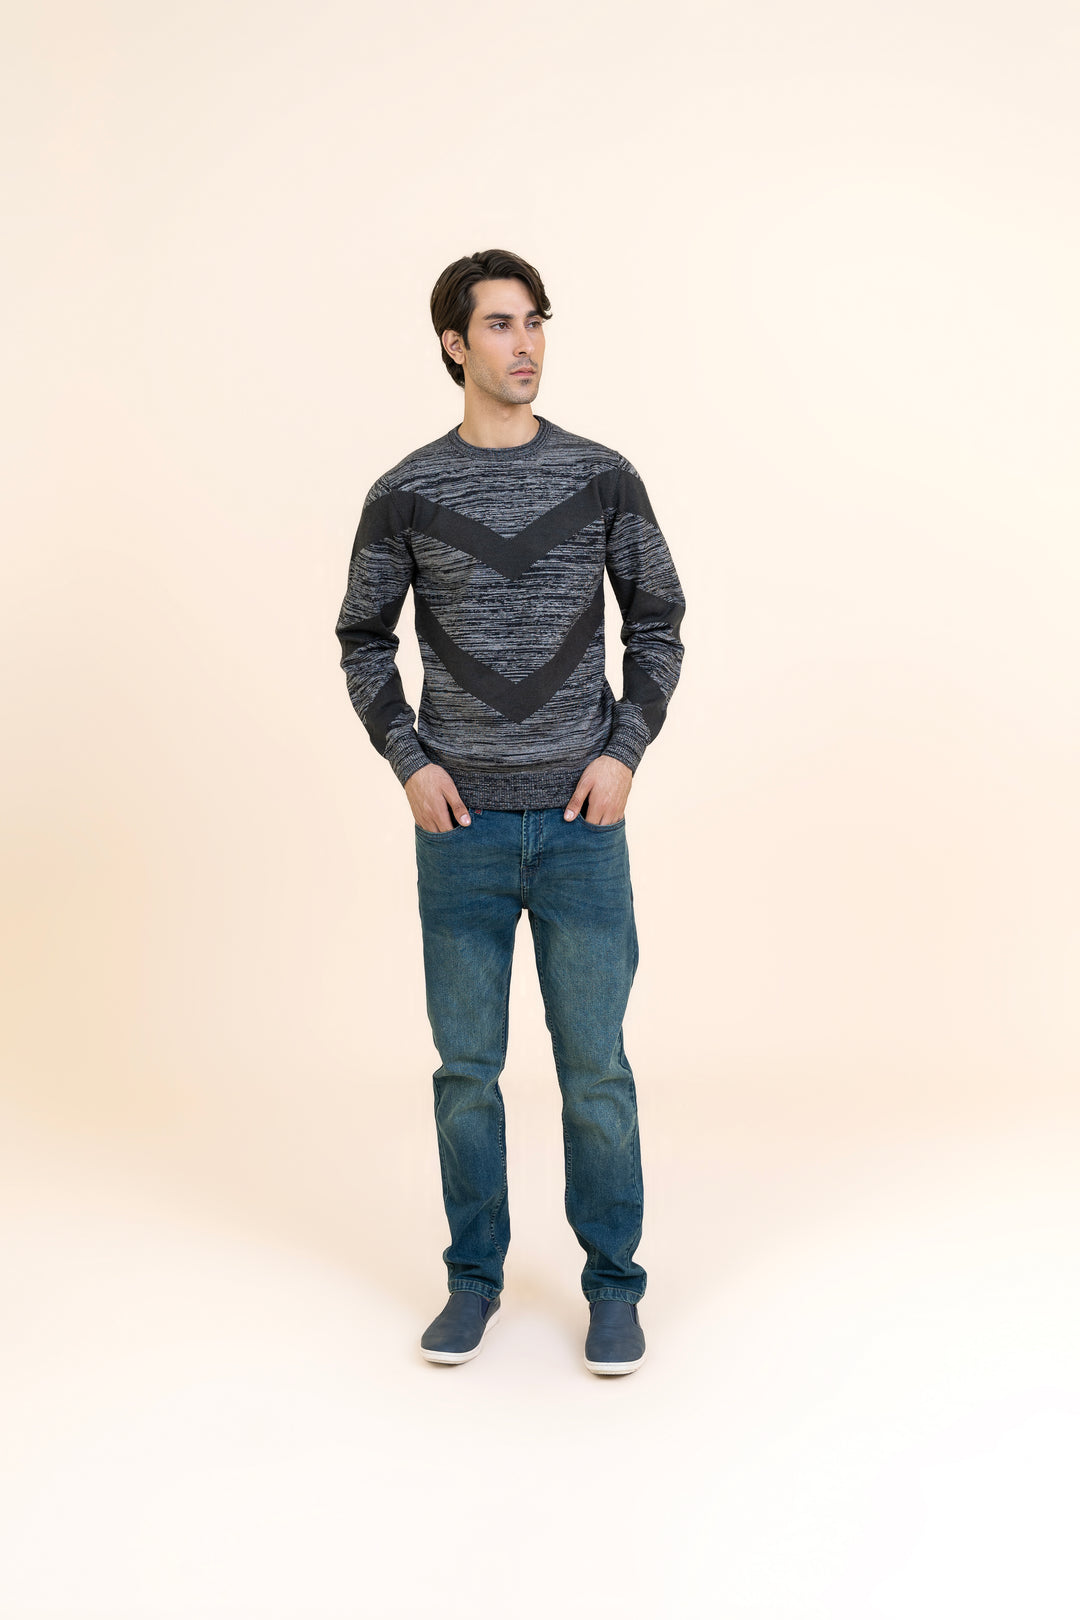 Melange Gray with Green Tripe Sweater T103-T1